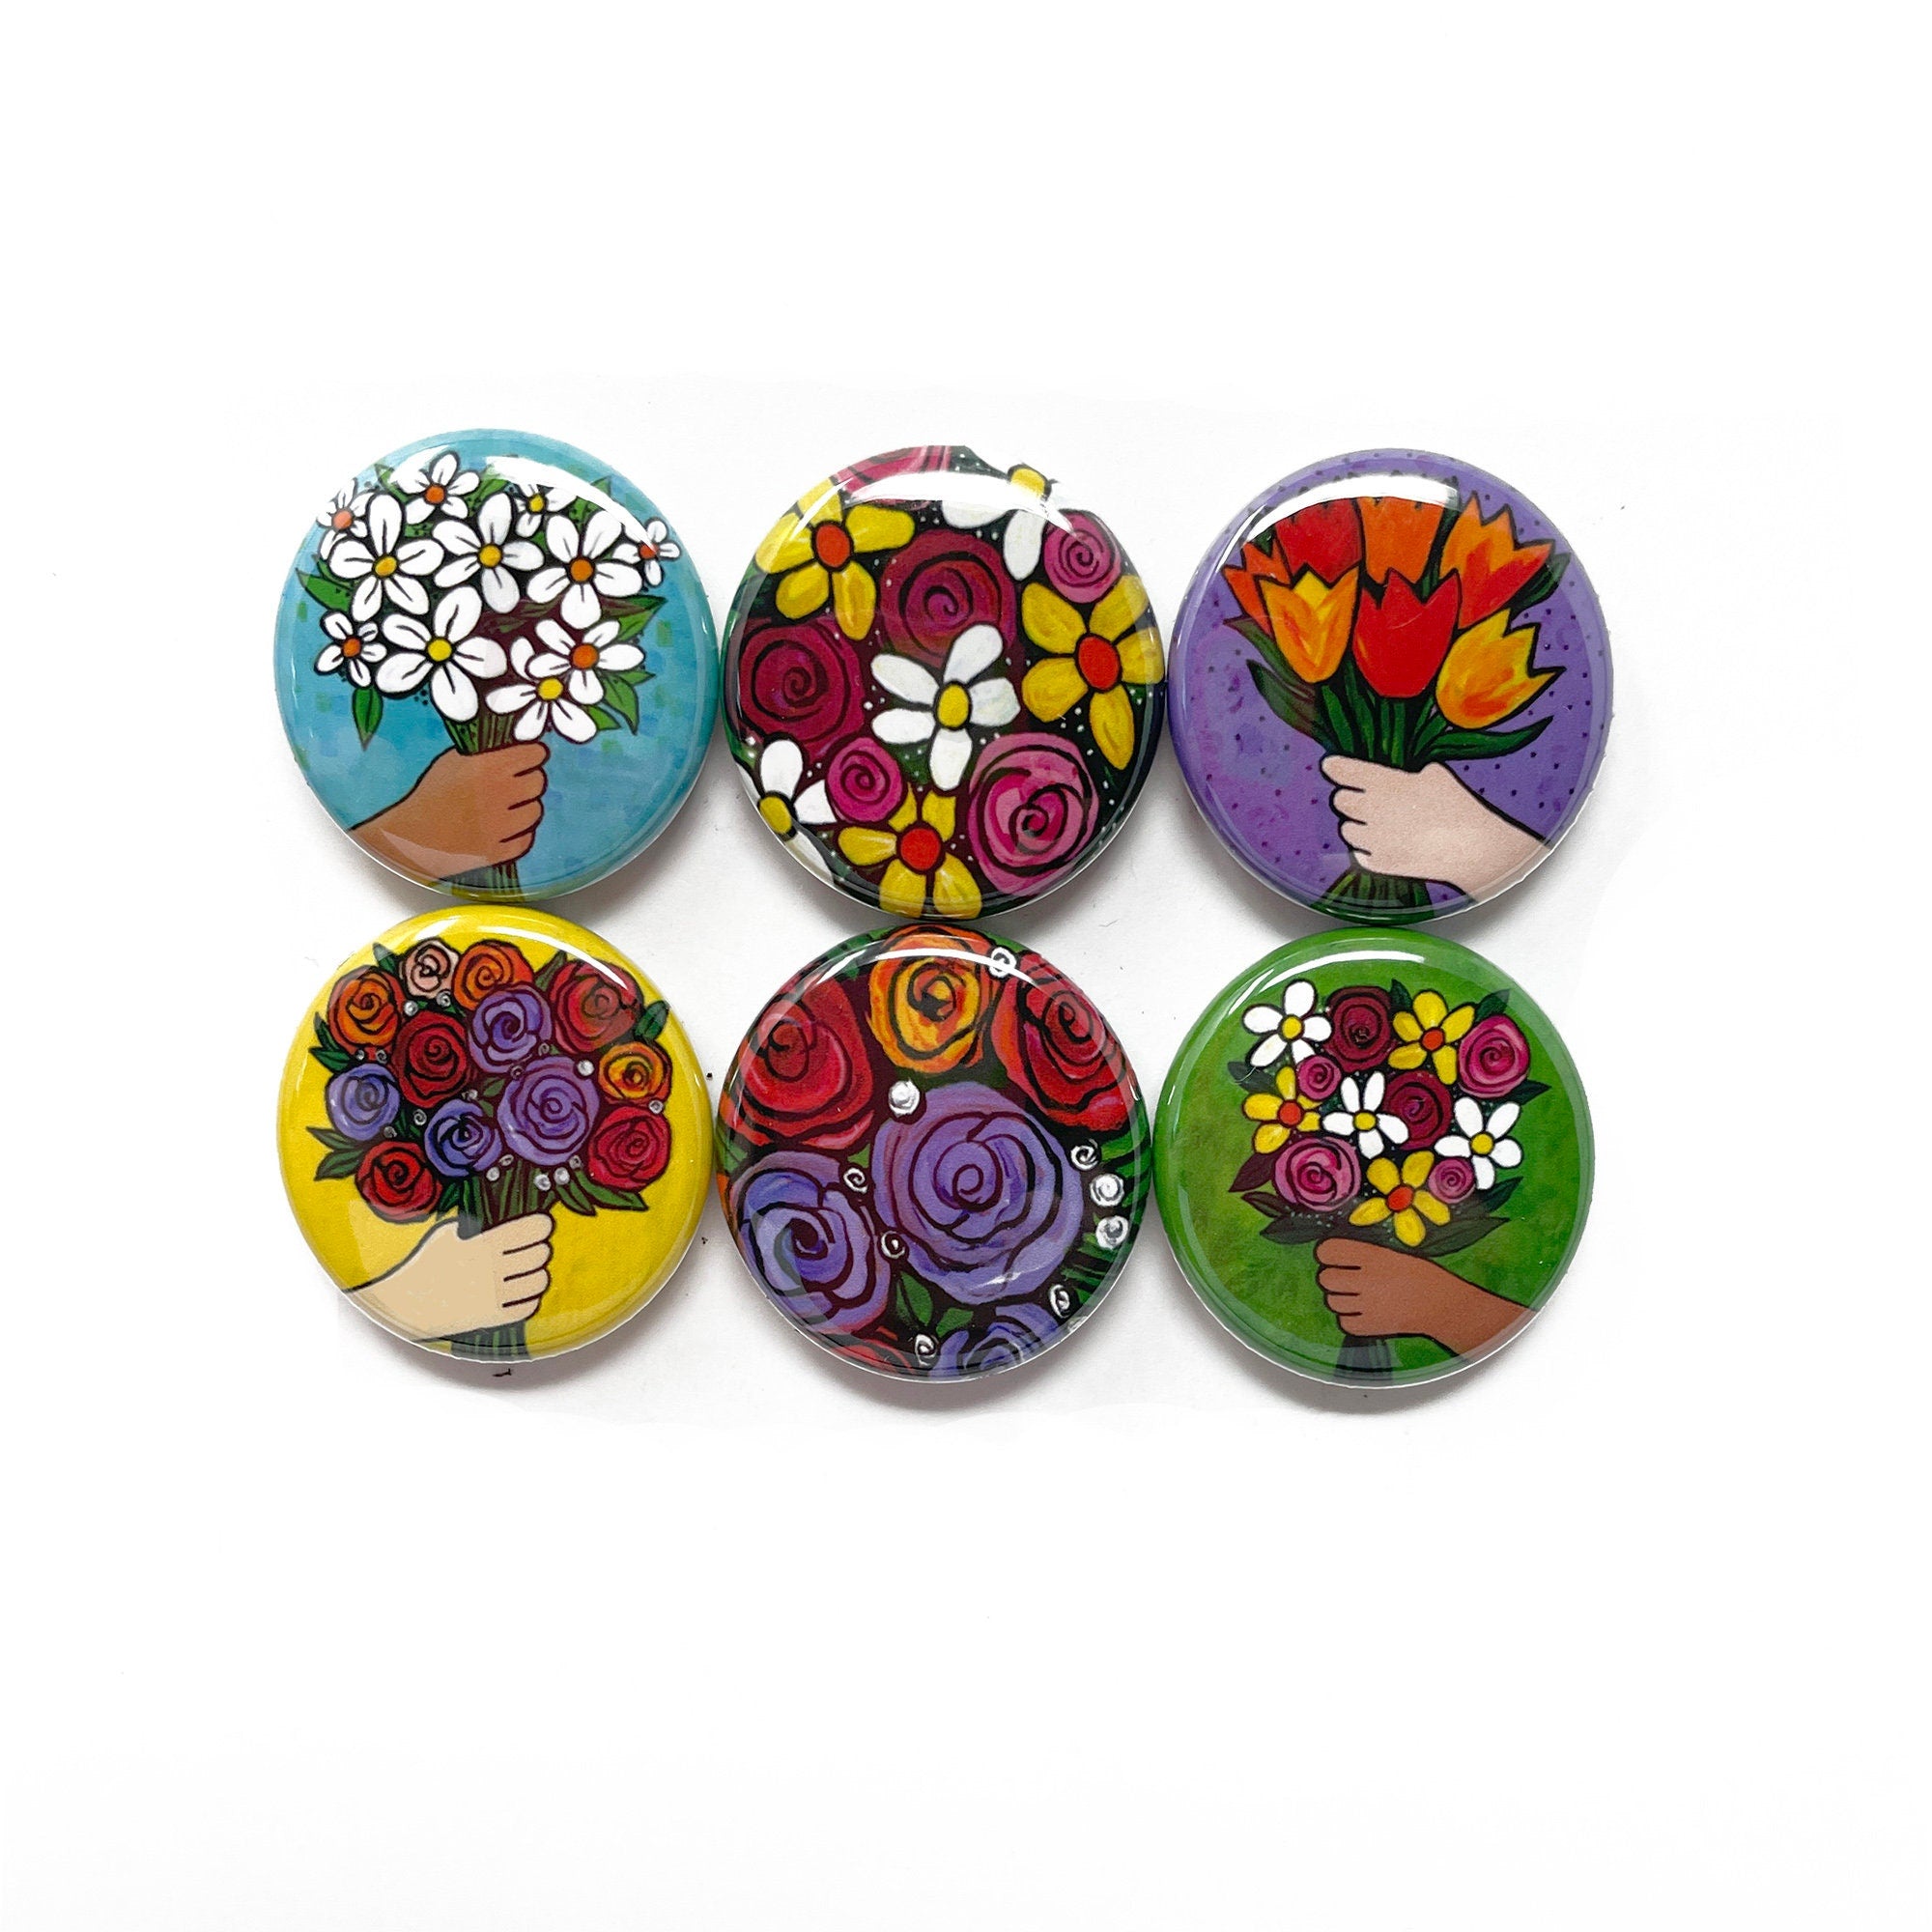 Flower Bouquet Magnets or Pins - Set of 6 Magnets or Pinback Buttons - Flower Party Favors or Stocking Stuffers